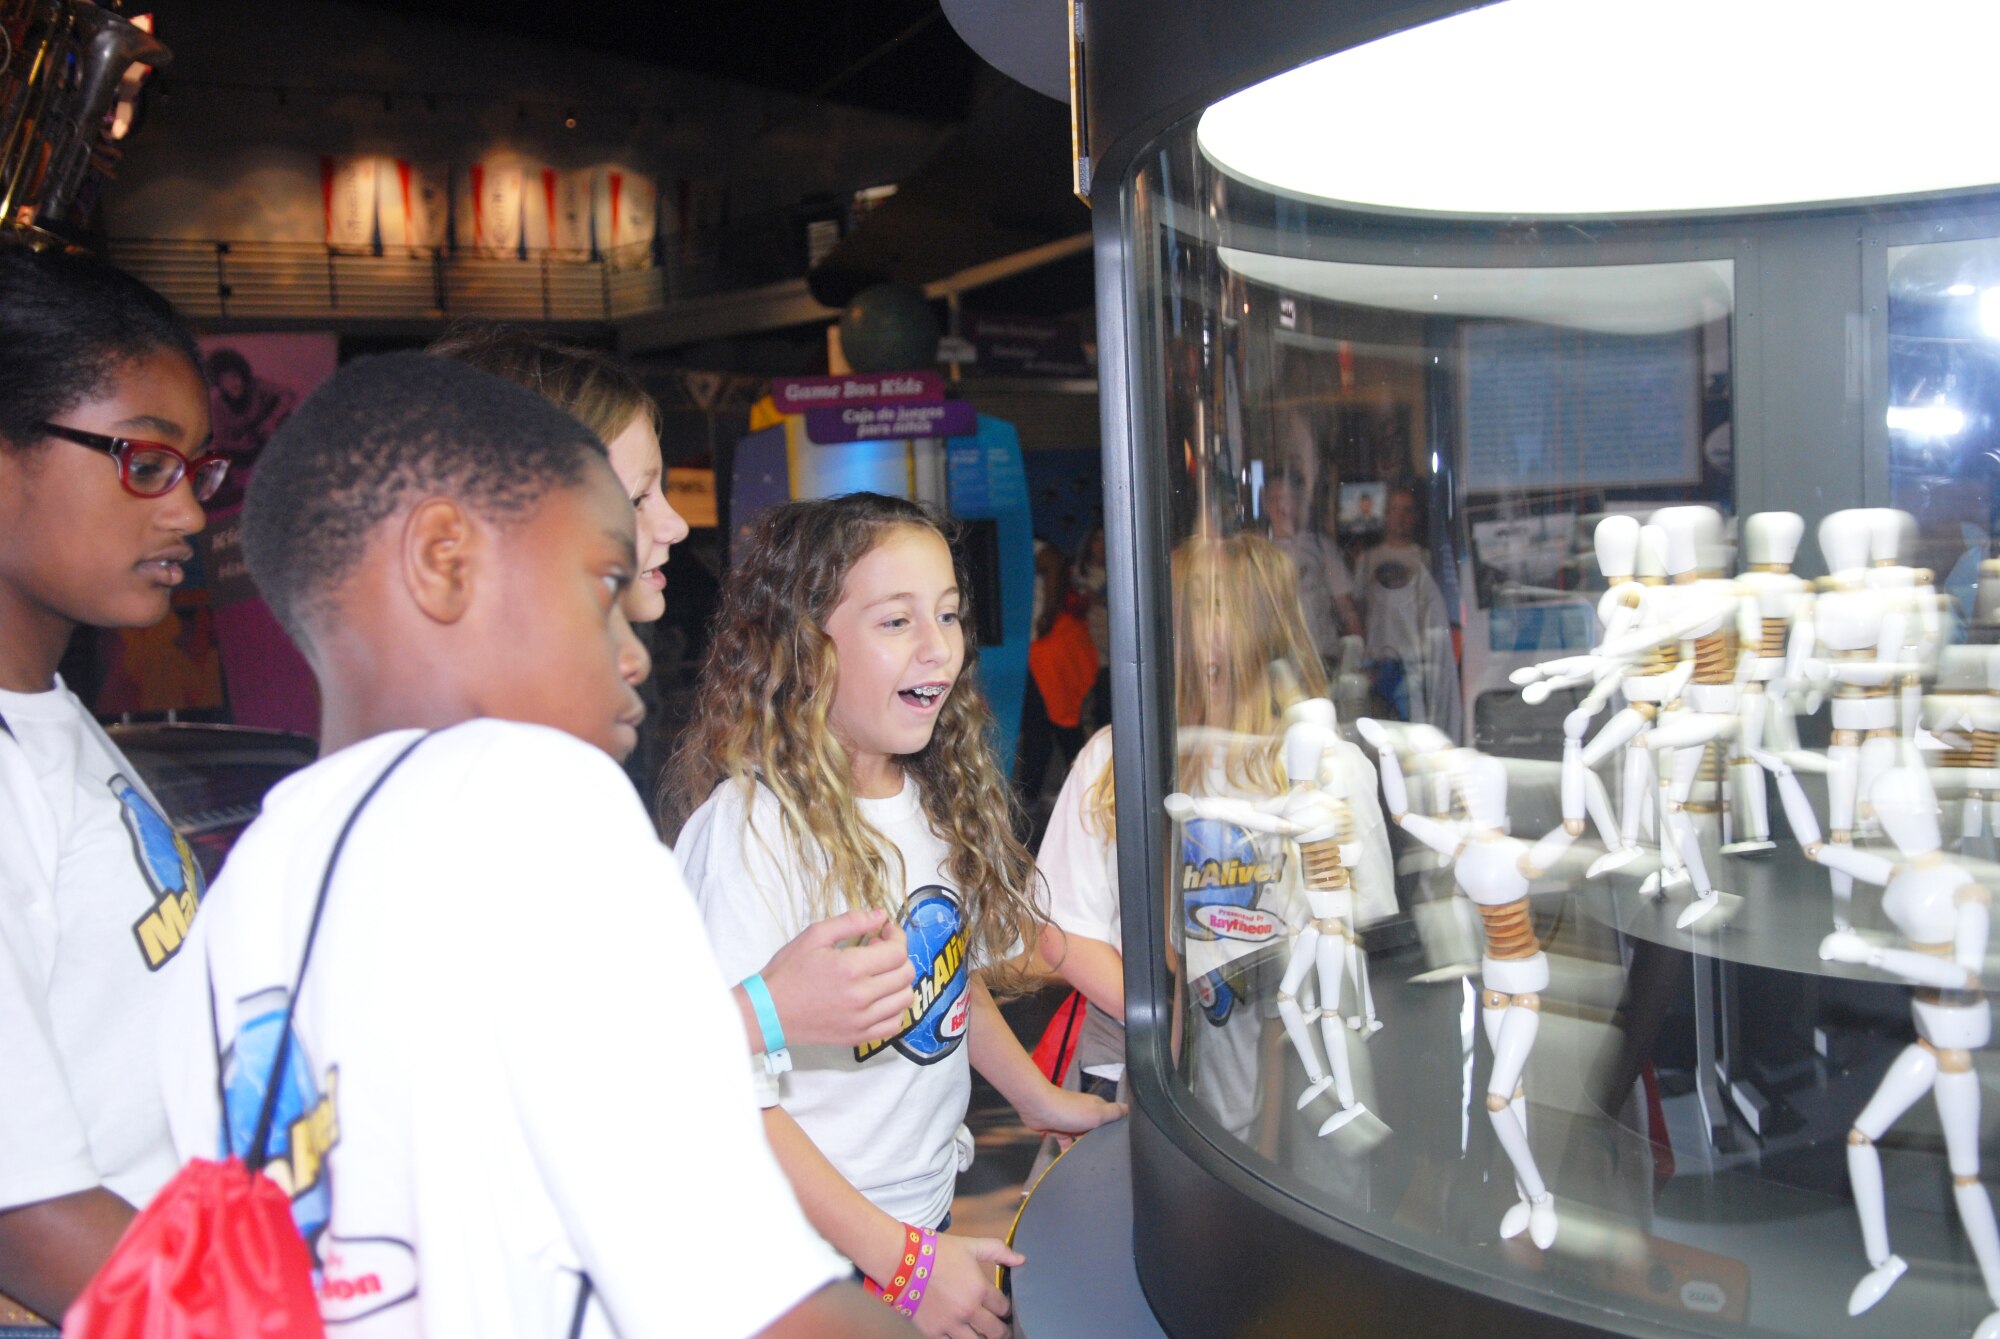 The fifth graders in Daughtry Elementary School in Jackson, Georgia, enjoy the Flicker Fusion interactive booth at the Museum of Aviation’s Century of Flight Hangar. The students learned that when light flashes more than 24 flashes per second, it is too fast for the human eye to see. (U.S. Air Force photo by Misuzu Allen)